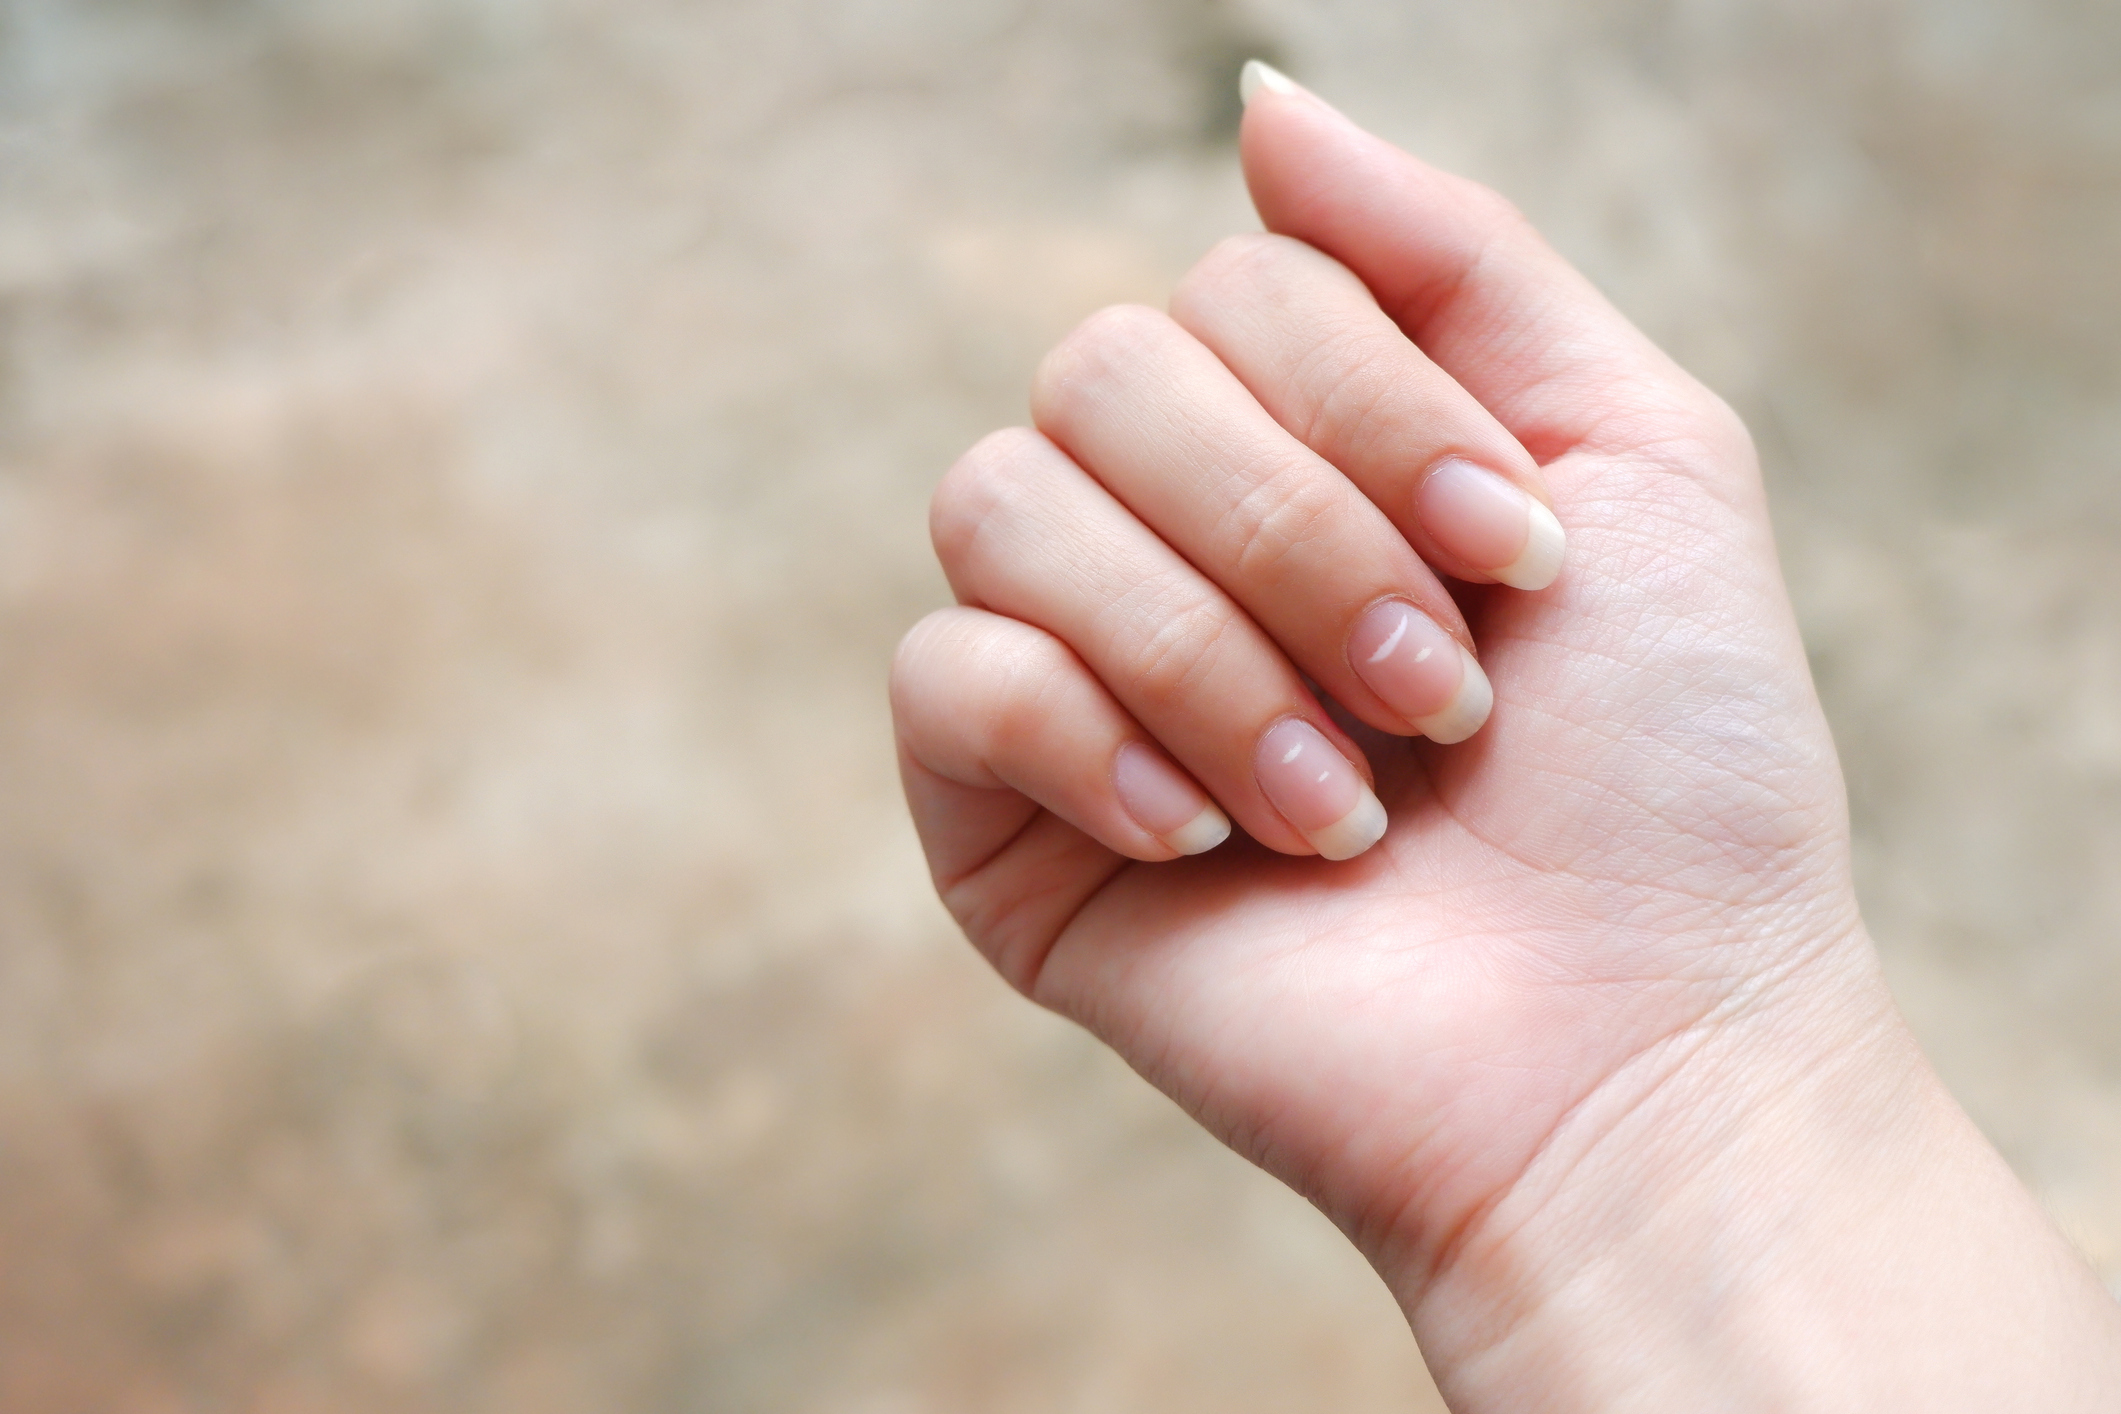 What Are Those White Spots On My Nails? | Footfiles